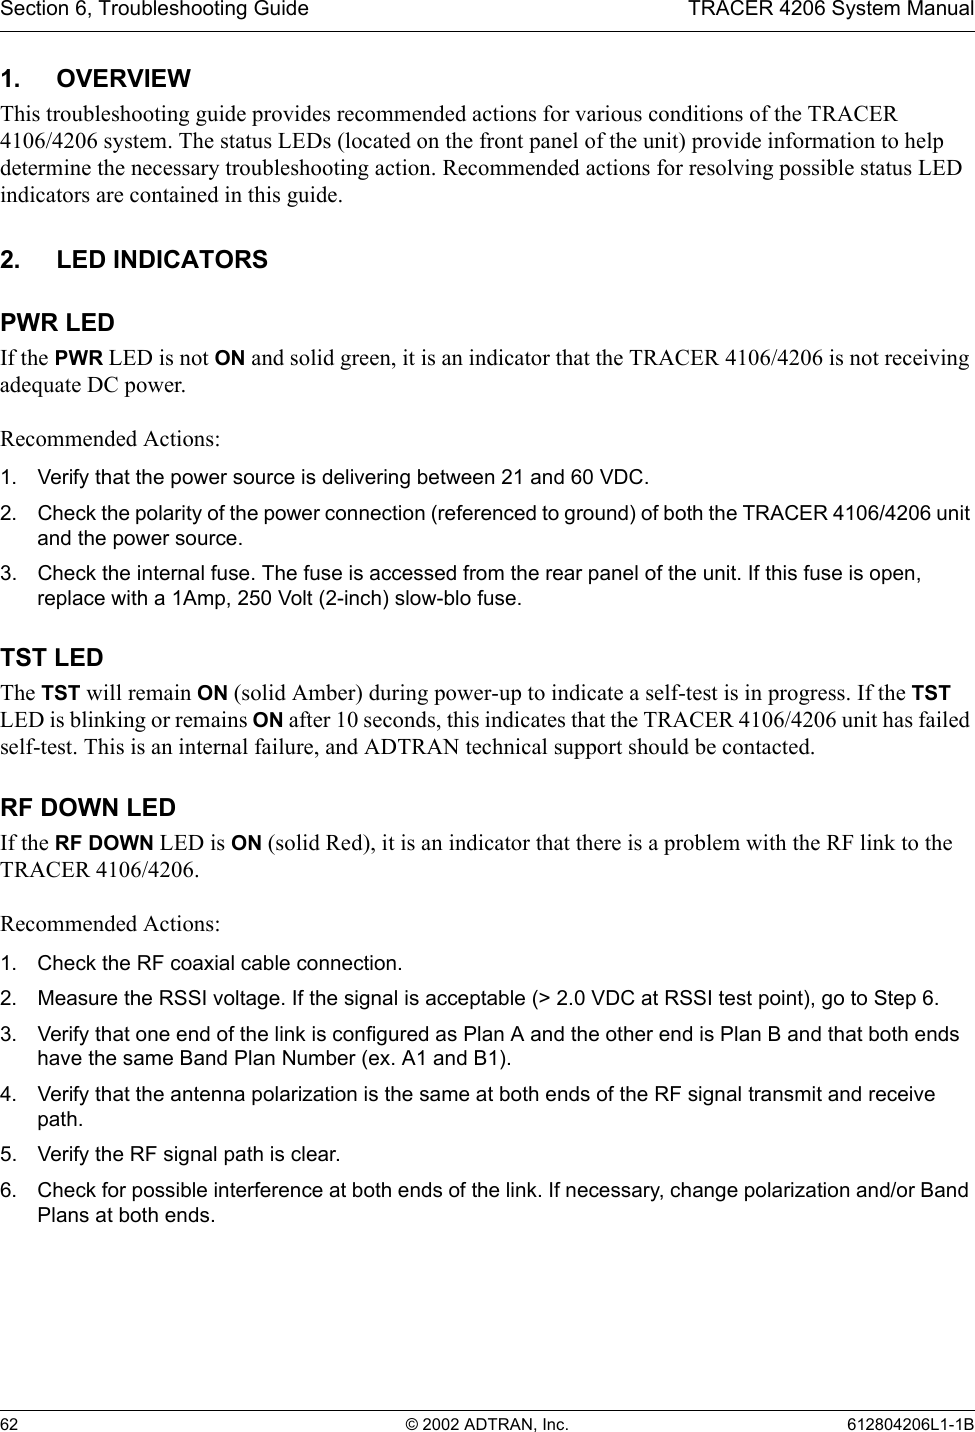 Section 6, Troubleshooting Guide TRACER 4206 System Manual62 © 2002 ADTRAN, Inc. 612804206L1-1B1. OVERVIEWThis troubleshooting guide provides recommended actions for various conditions of the TRACER 4106/4206 system. The status LEDs (located on the front panel of the unit) provide information to help determine the necessary troubleshooting action. Recommended actions for resolving possible status LED indicators are contained in this guide.2. LED INDICATORSPWR LEDIf the PWR LED is not ON and solid green, it is an indicator that the TRACER 4106/4206 is not receiving adequate DC power. Recommended Actions:1. Verify that the power source is delivering between 21 and 60 VDC.2. Check the polarity of the power connection (referenced to ground) of both the TRACER 4106/4206 unit and the power source.3. Check the internal fuse. The fuse is accessed from the rear panel of the unit. If this fuse is open, replace with a 1Amp, 250 Volt (2-inch) slow-blo fuse.TST LEDThe TST will remain ON (solid Amber) during power-up to indicate a self-test is in progress. If the TST LED is blinking or remains ON after 10 seconds, this indicates that the TRACER 4106/4206 unit has failed self-test. This is an internal failure, and ADTRAN technical support should be contacted.RF DOWN LEDIf the RF DOWN LED is ON (solid Red), it is an indicator that there is a problem with the RF link to the TRACER 4106/4206.Recommended Actions:1. Check the RF coaxial cable connection.2. Measure the RSSI voltage. If the signal is acceptable (&gt; 2.0 VDC at RSSI test point), go to Step 6.3. Verify that one end of the link is configured as Plan A and the other end is Plan B and that both ends have the same Band Plan Number (ex. A1 and B1).4. Verify that the antenna polarization is the same at both ends of the RF signal transmit and receive path.5. Verify the RF signal path is clear.6. Check for possible interference at both ends of the link. If necessary, change polarization and/or Band Plans at both ends.